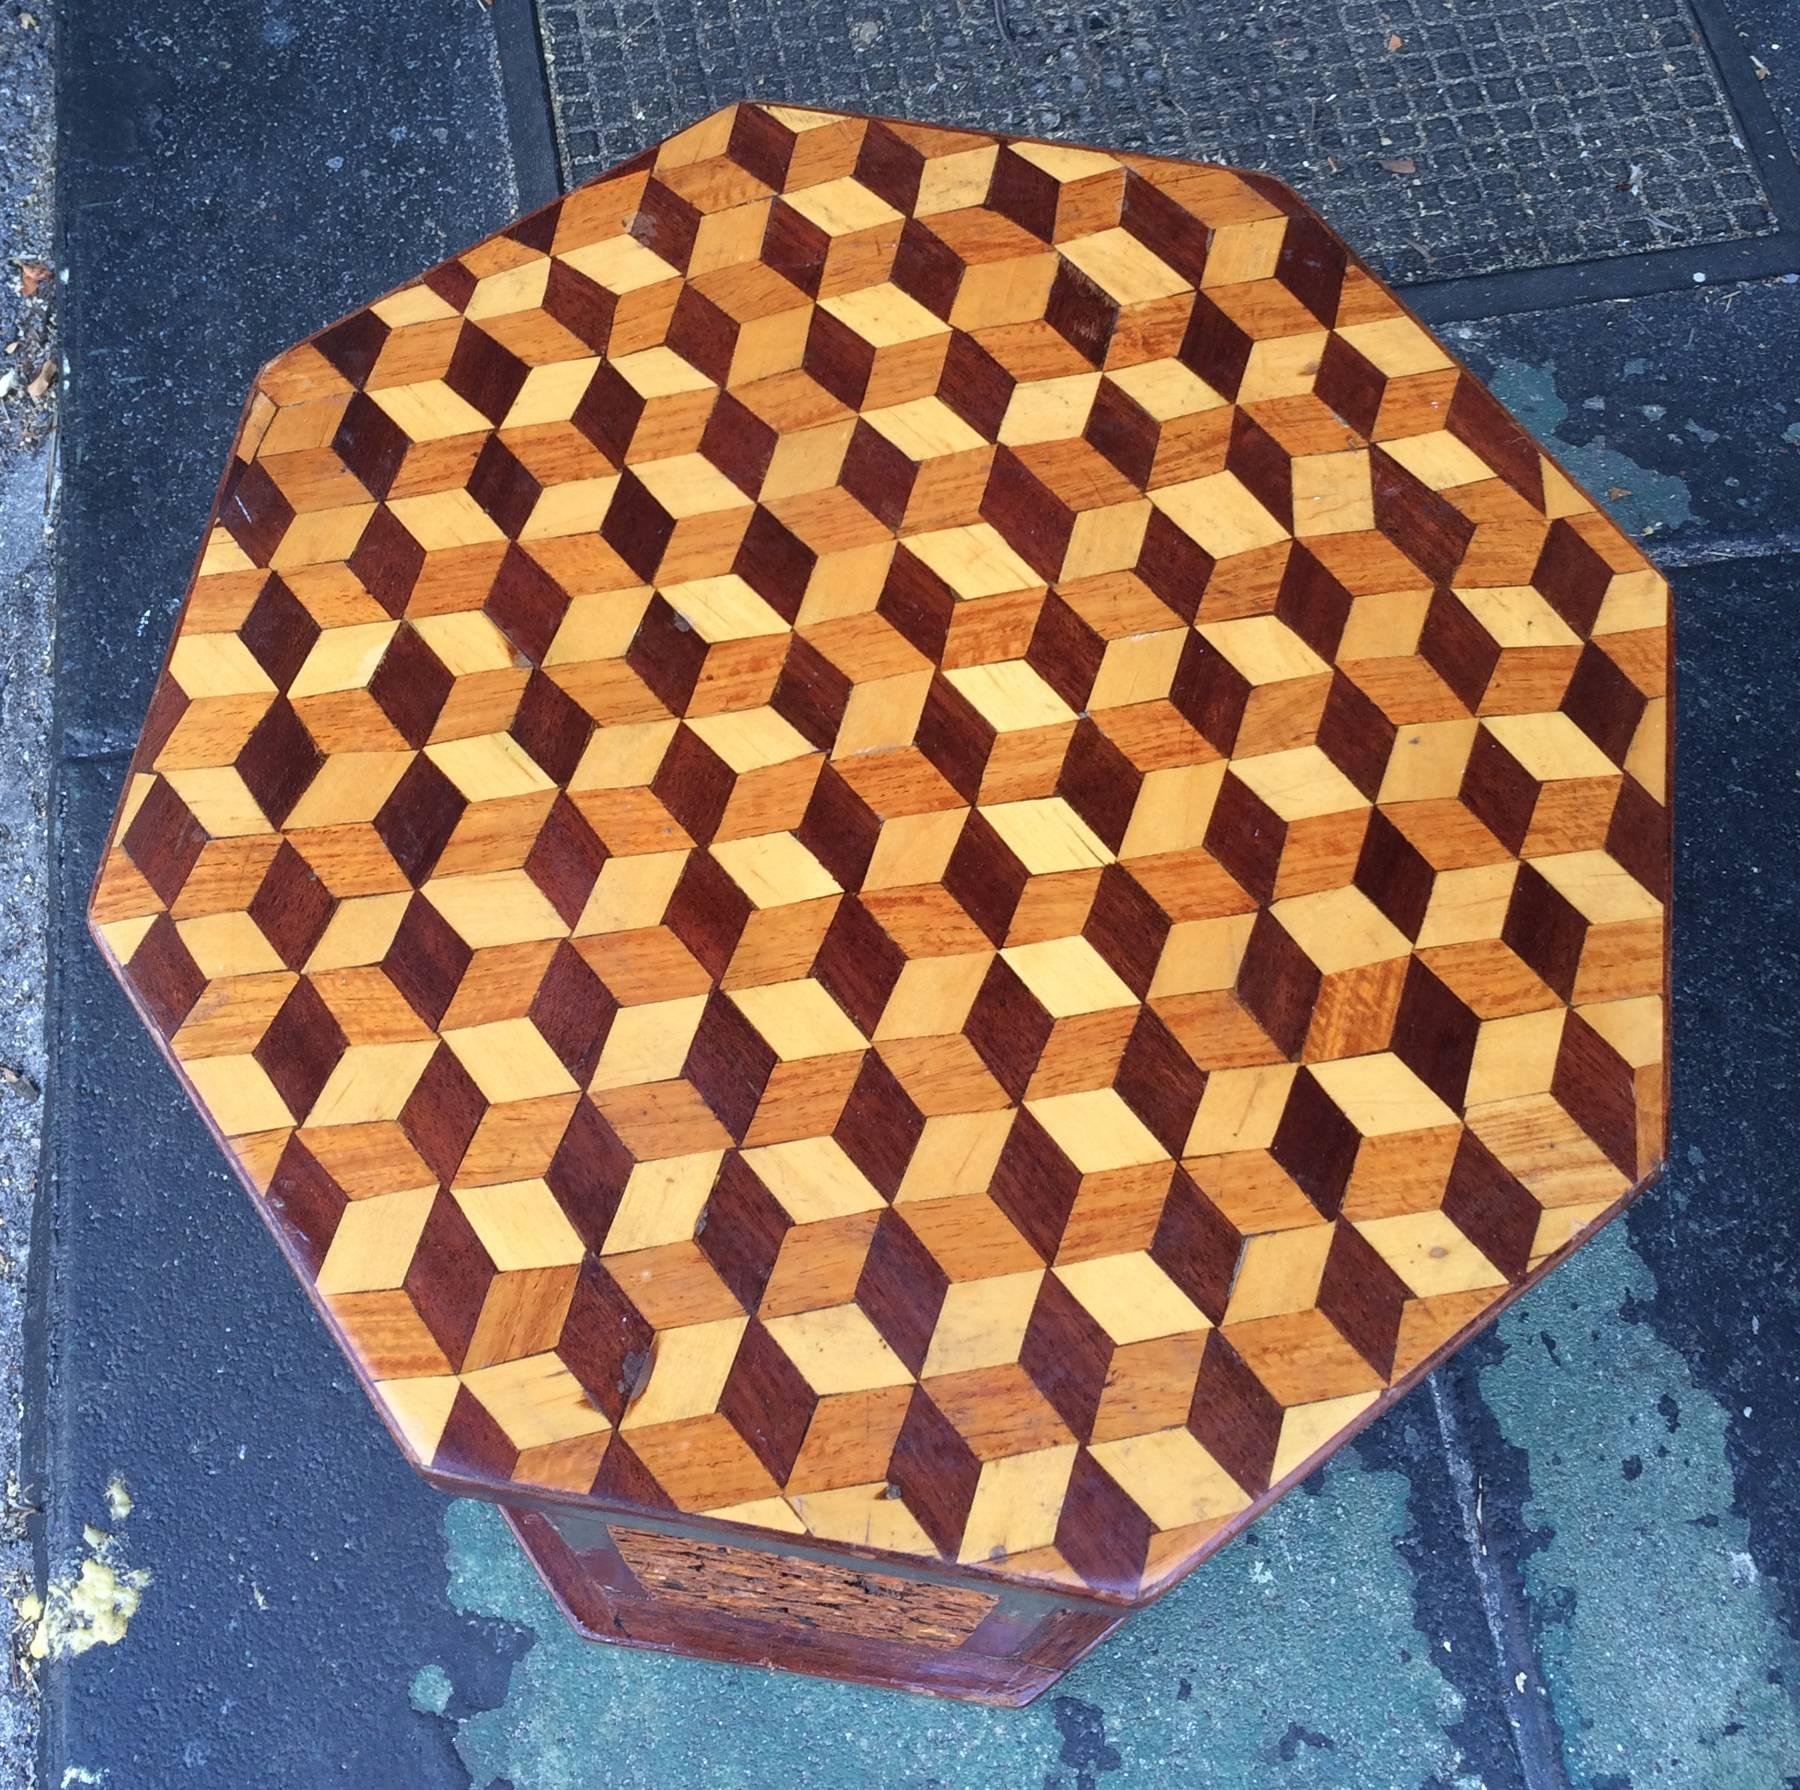 Three dimensional op art marquetry top side table. Table has walnut shells as decoration on the side panels. Fine craftsmanship signed Grandpappy WM A Duncan 1985 age 80 years. A truly unique piece of furniture.